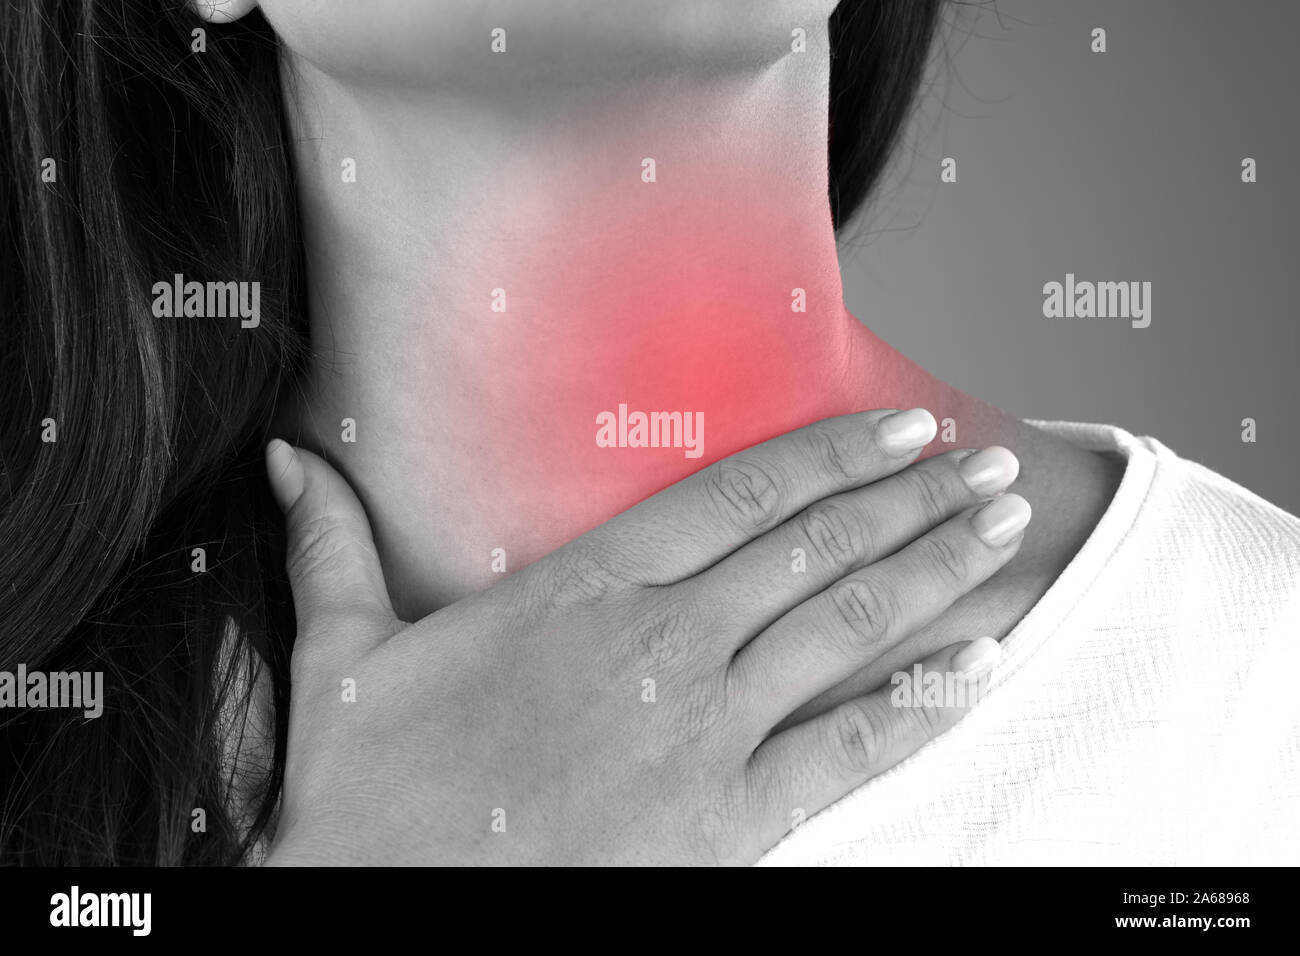 Close-up Of Female Suffering From Gland Inflammation Stock Photo